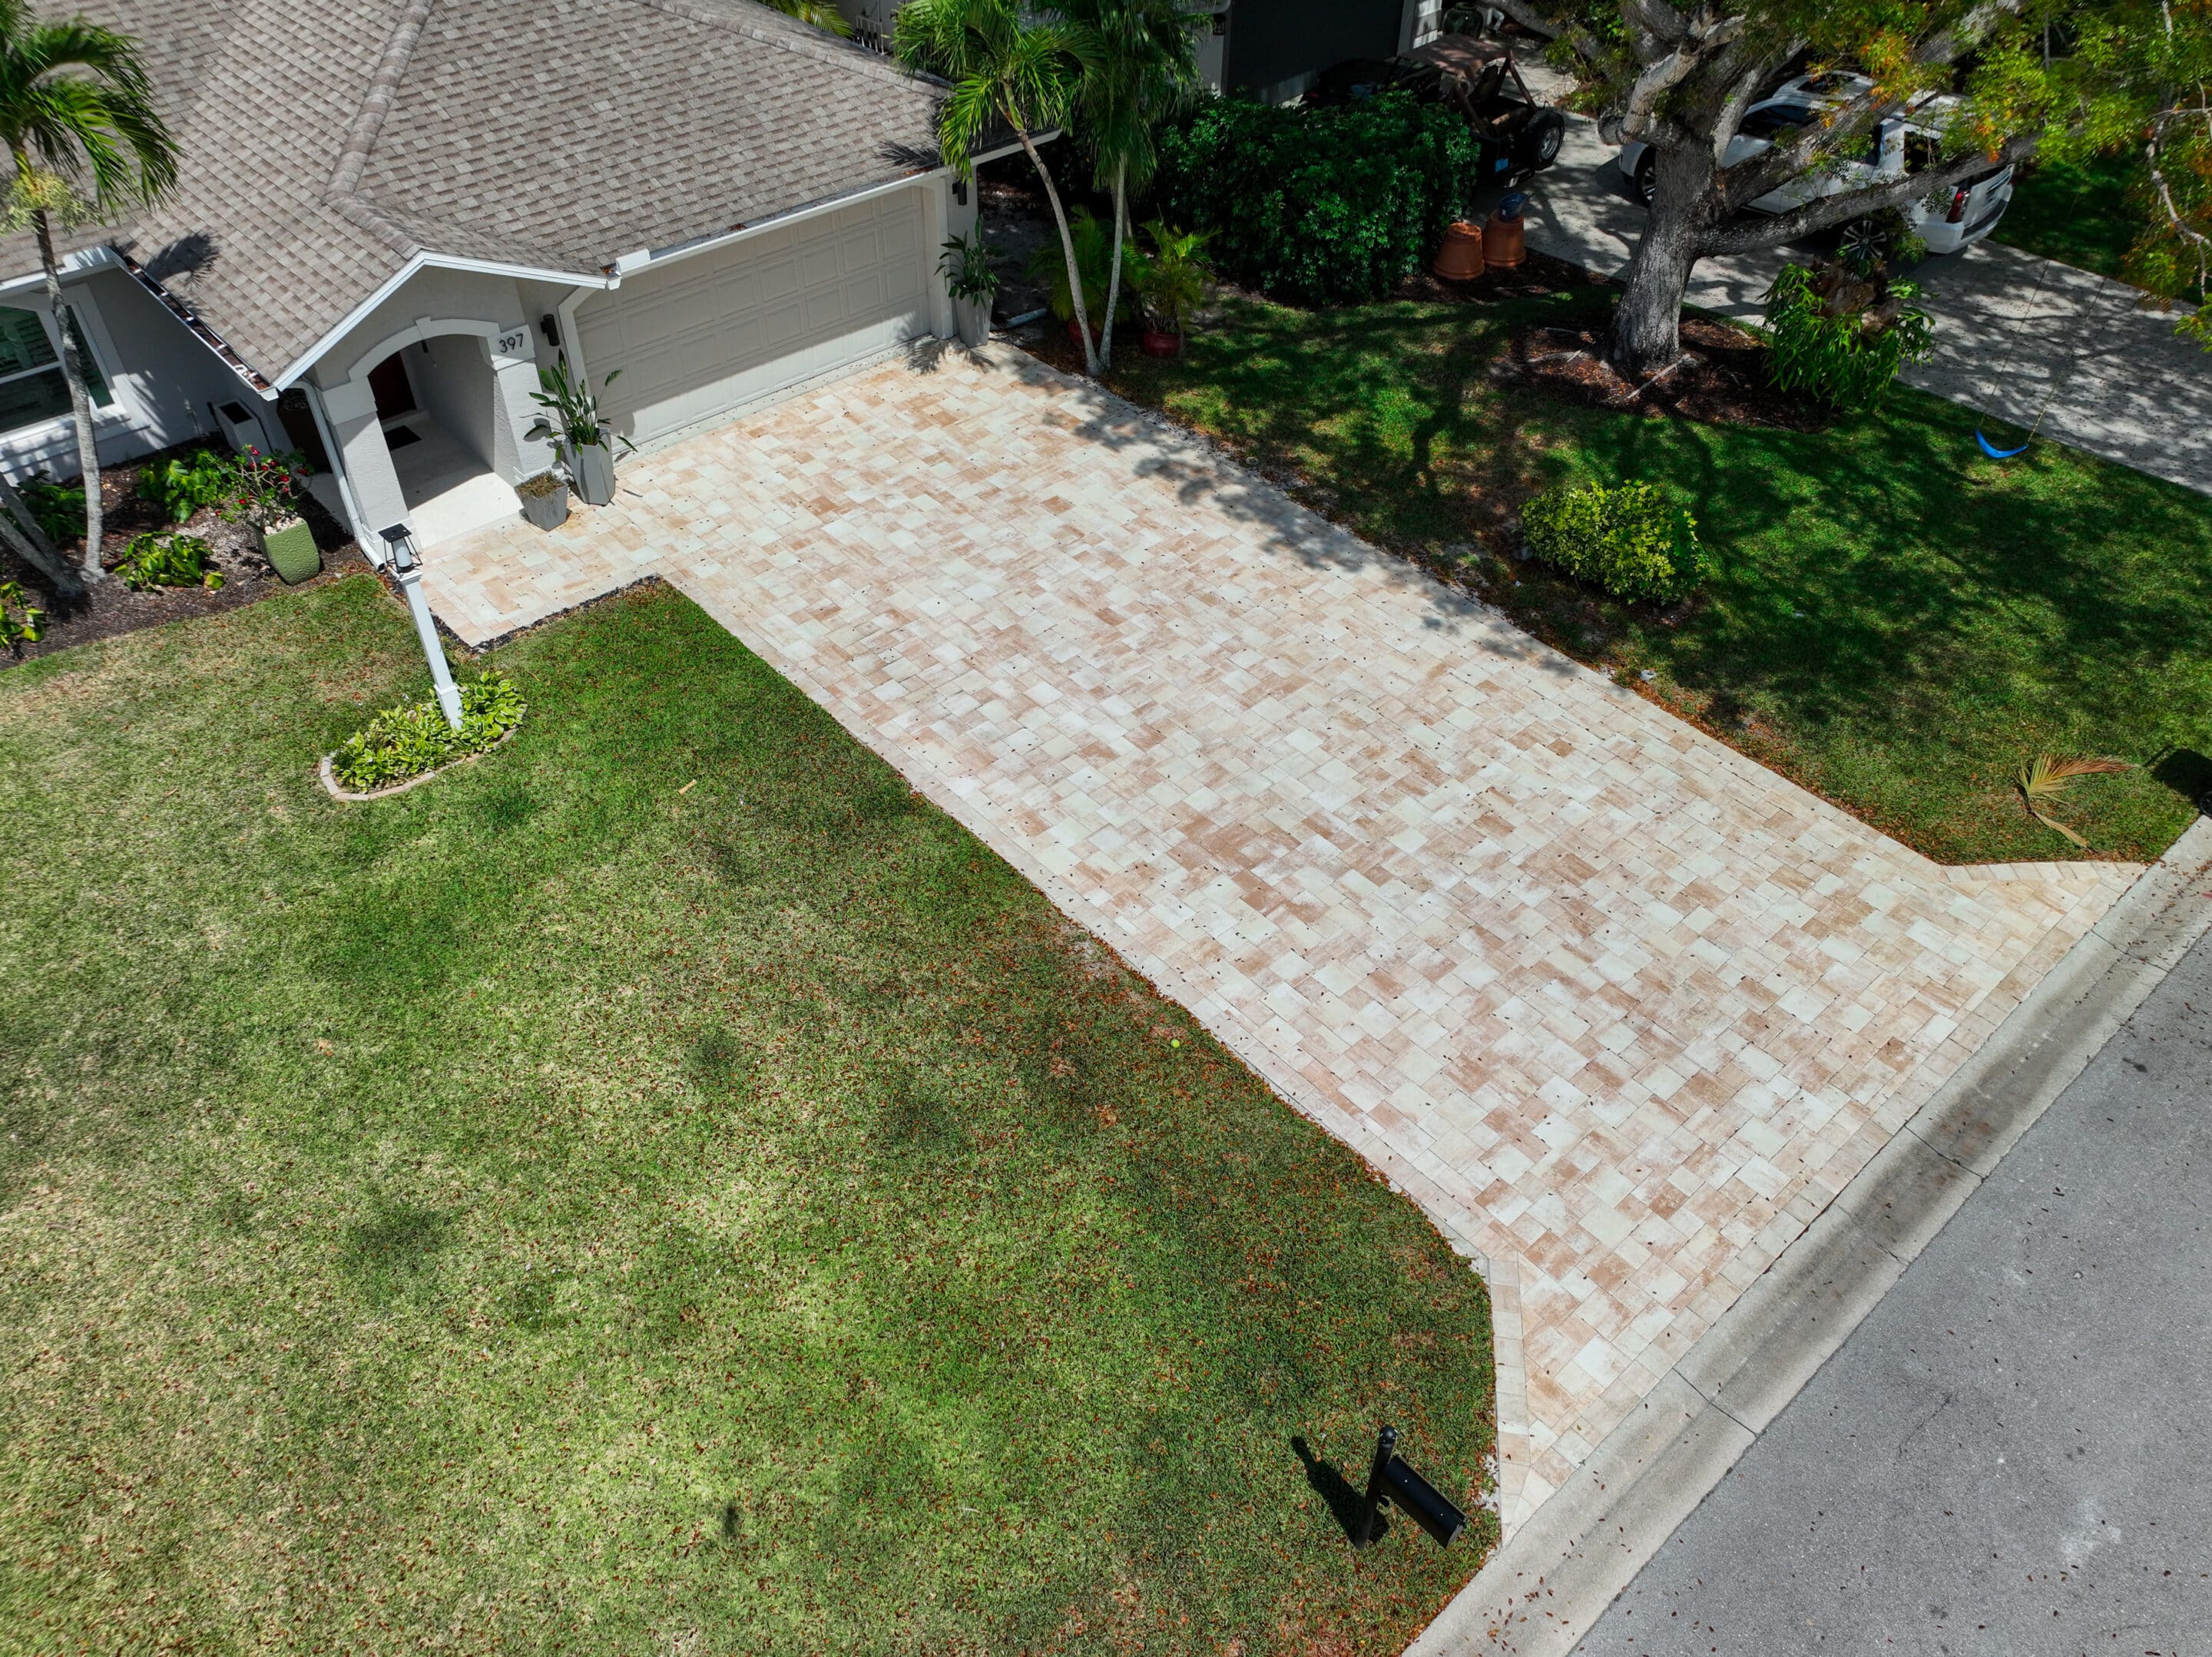 Aerial view of a paved driveway